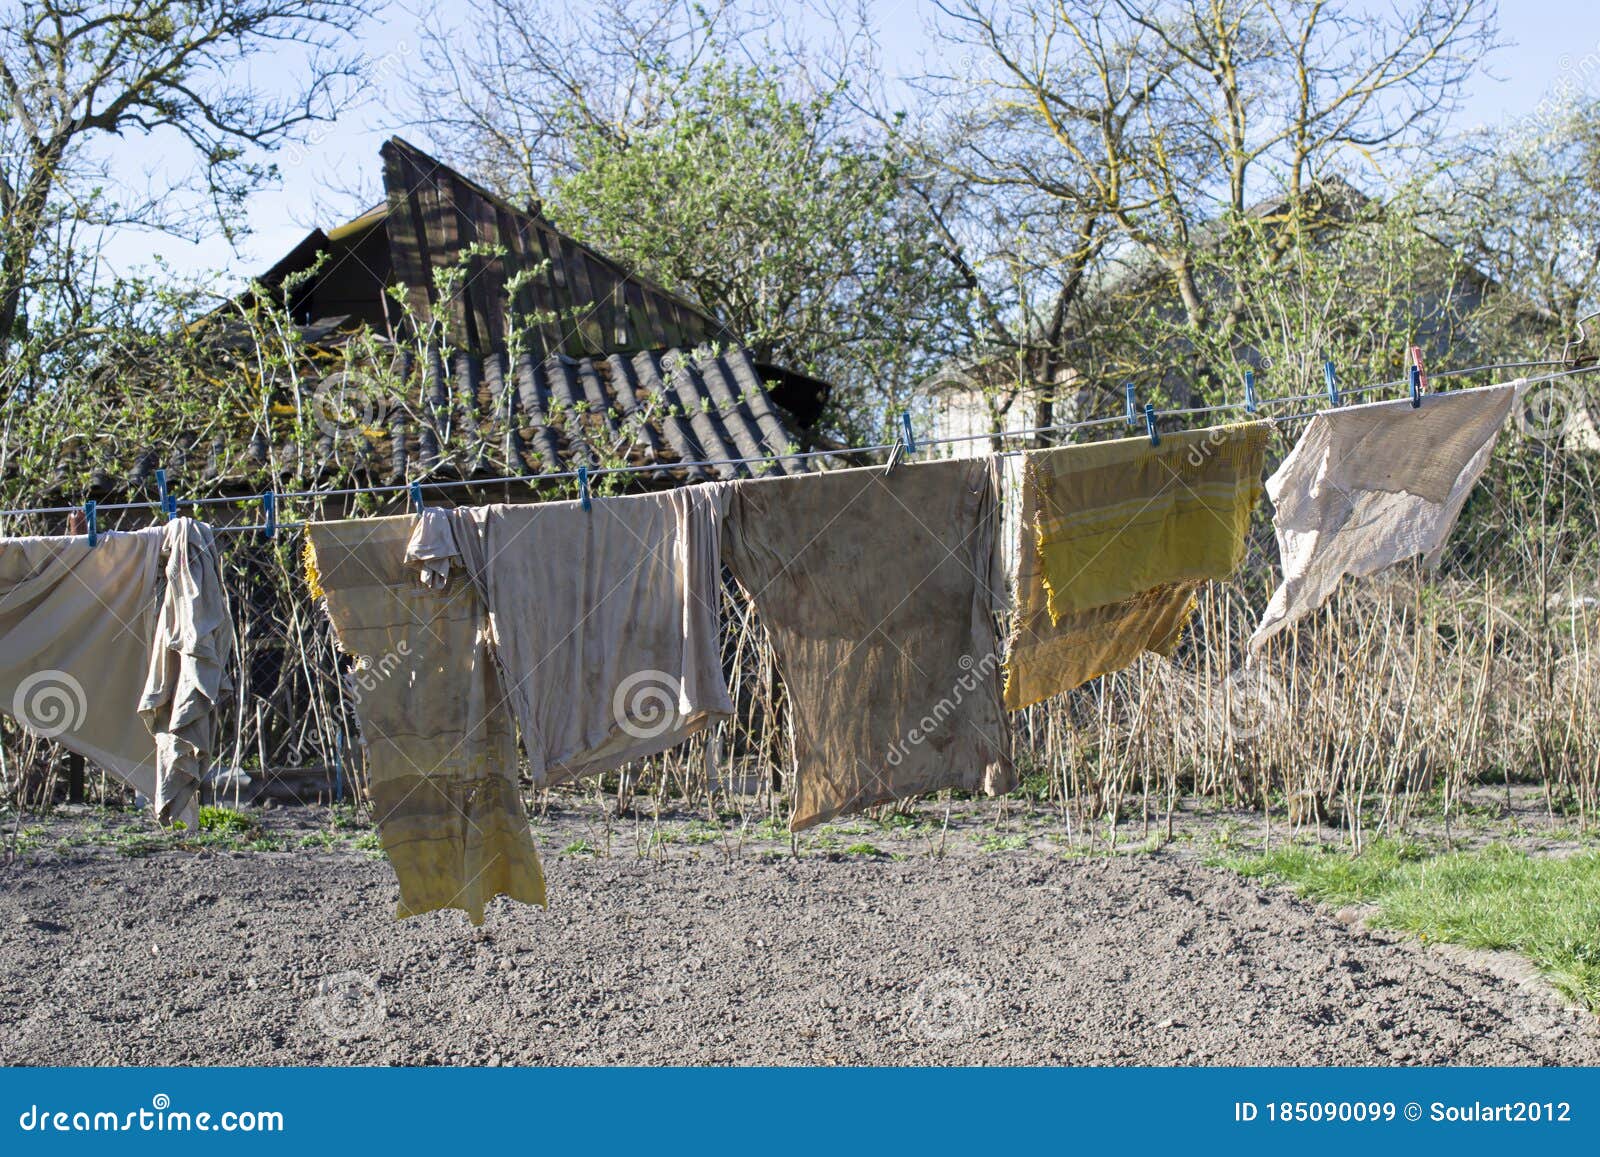 The Rags are Dried after Washing Against the Background of a ...